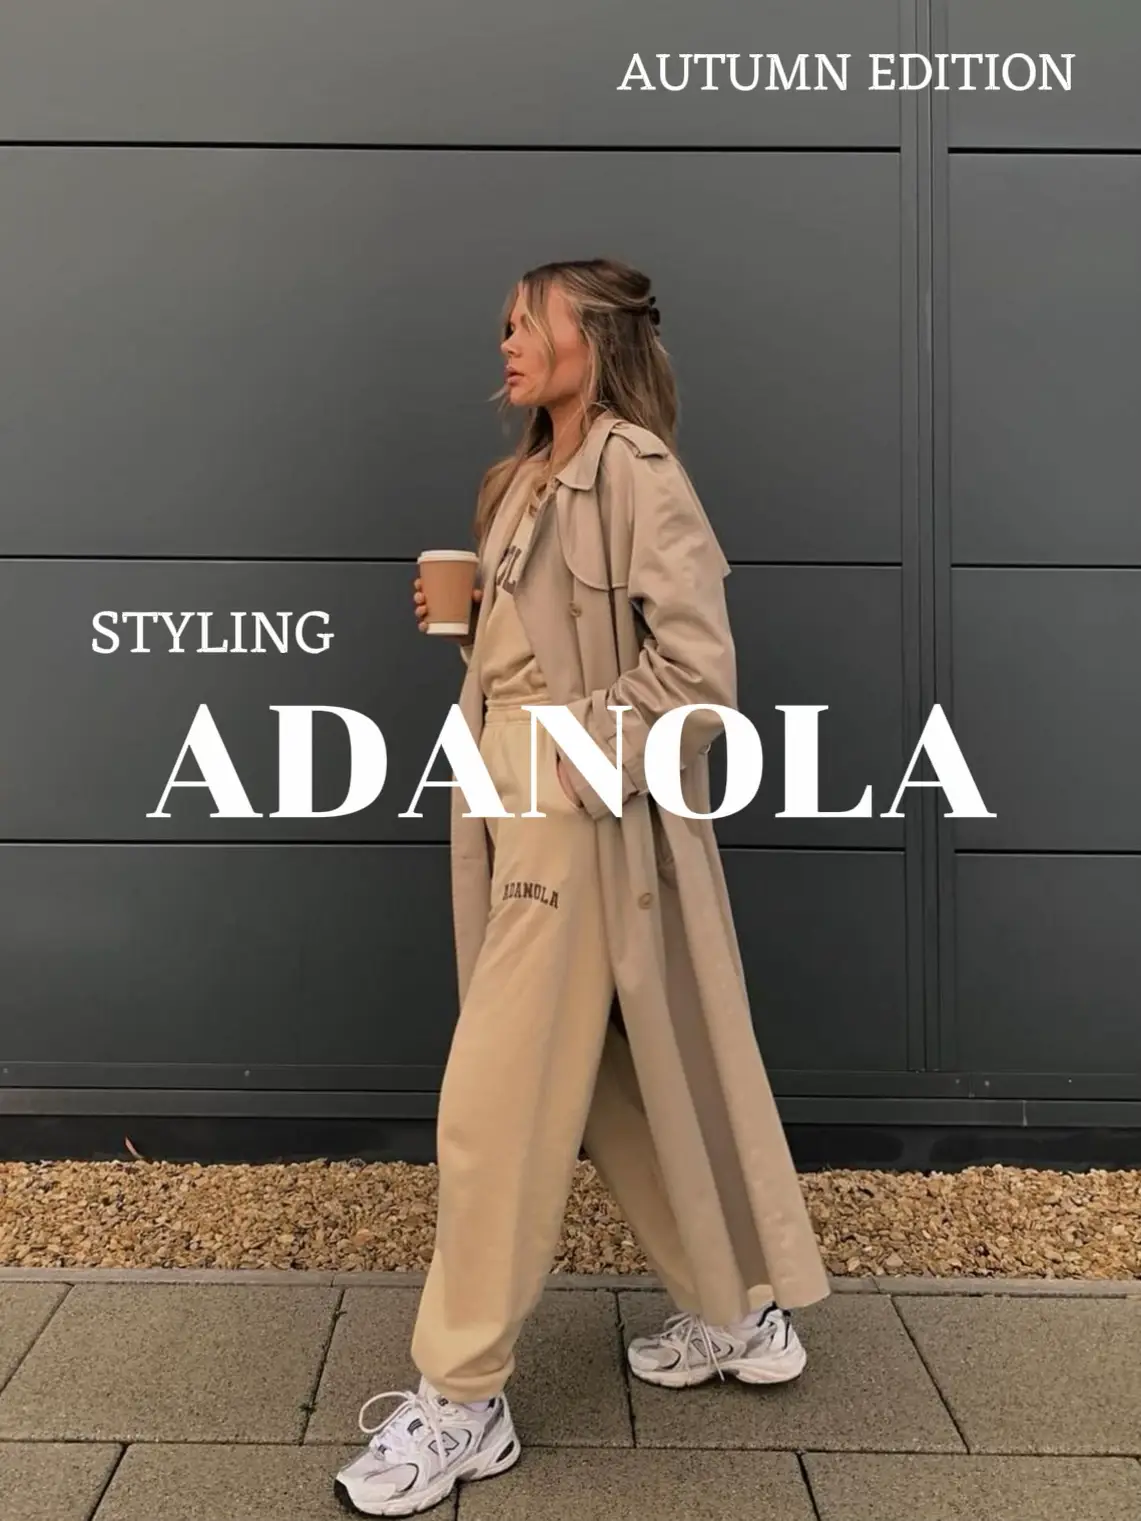 living in our coffee bean ultimate ☕️ #adanola #outfitideas